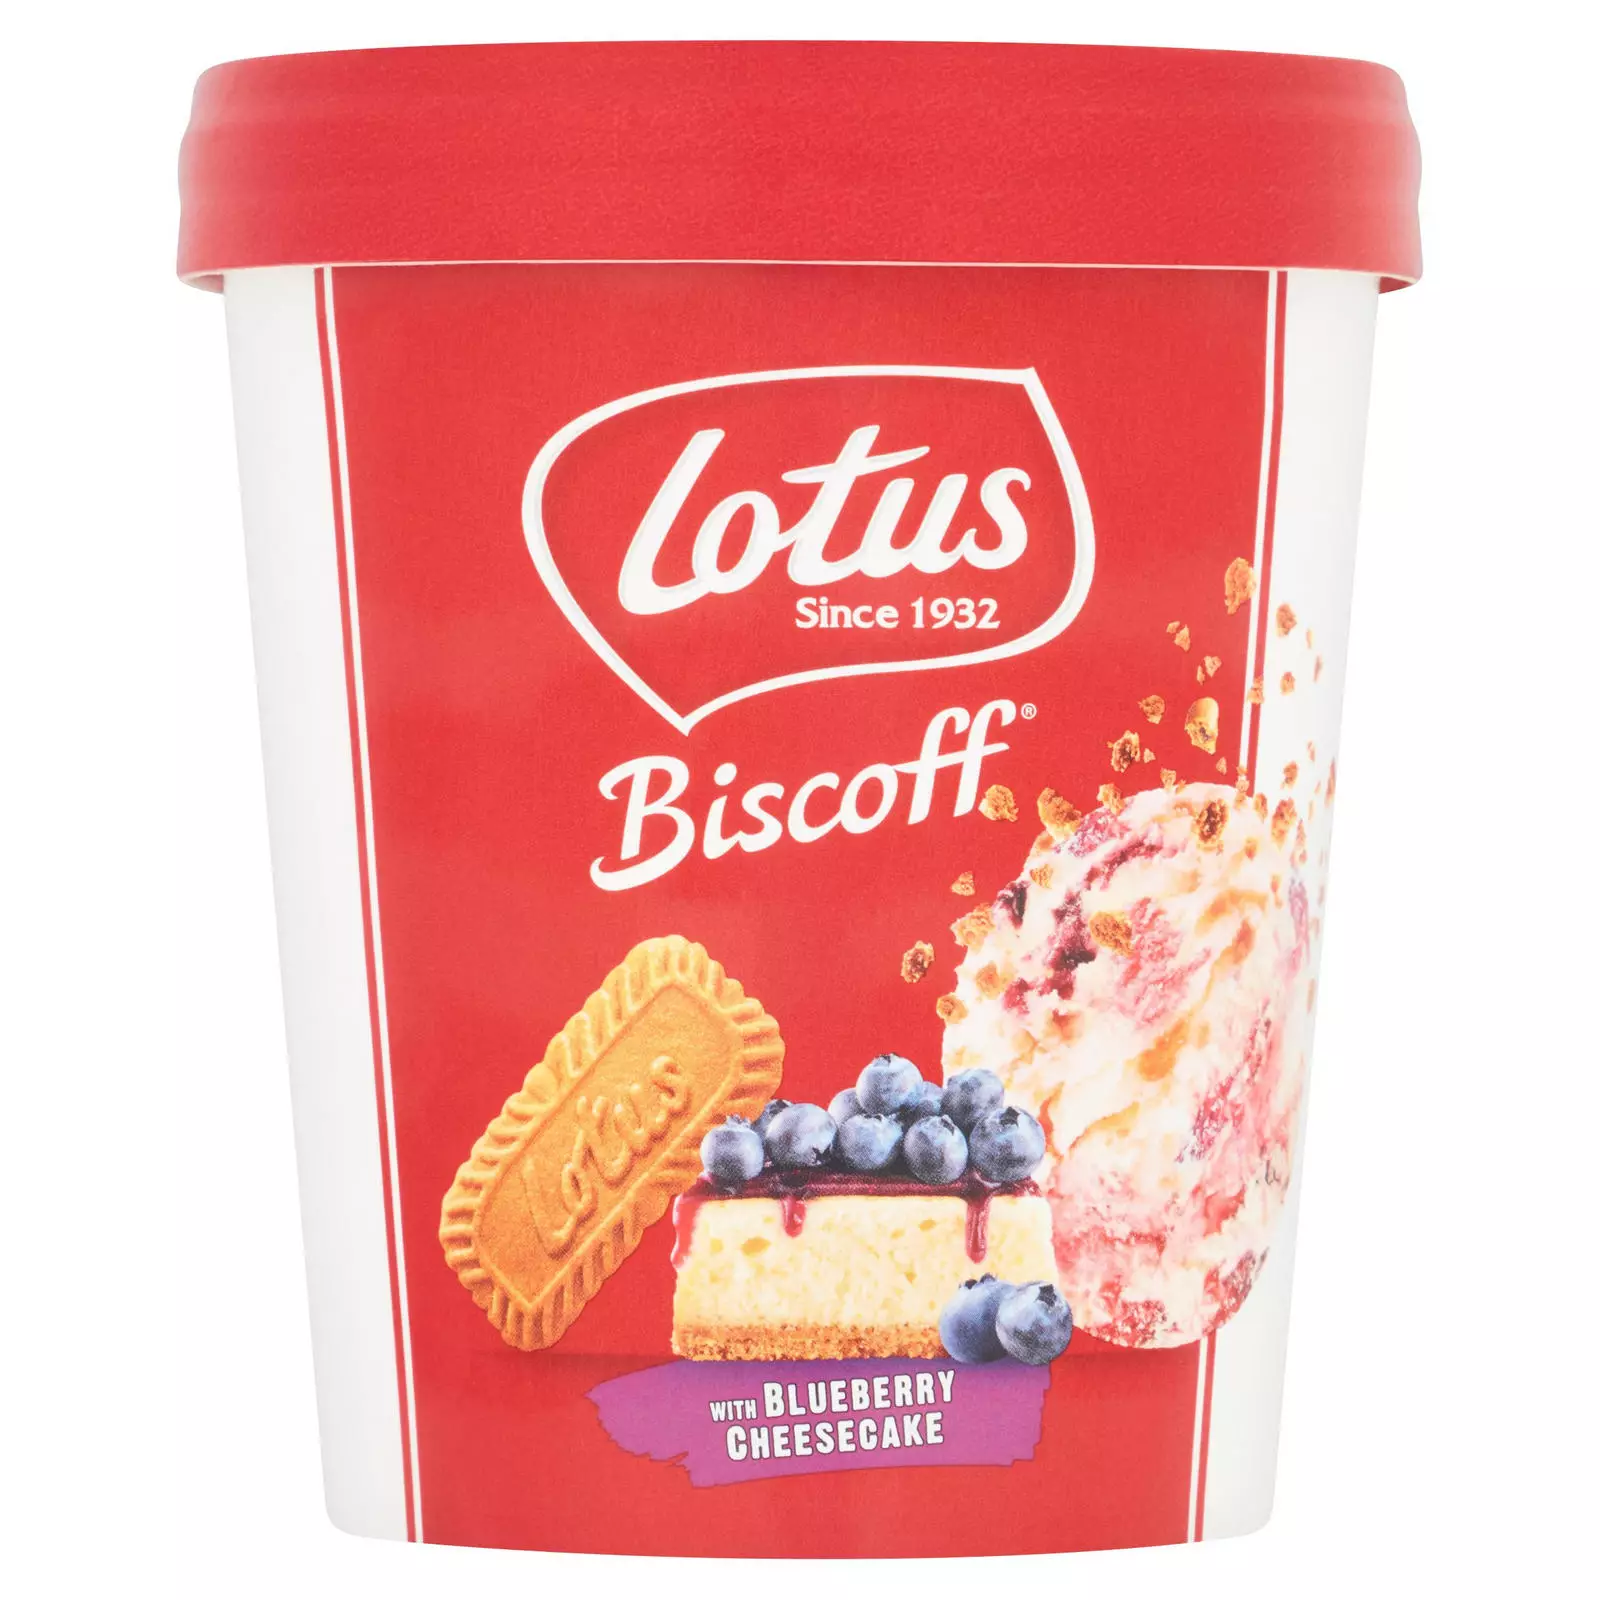 The blueberry cheesecake tub has a fruity twist (